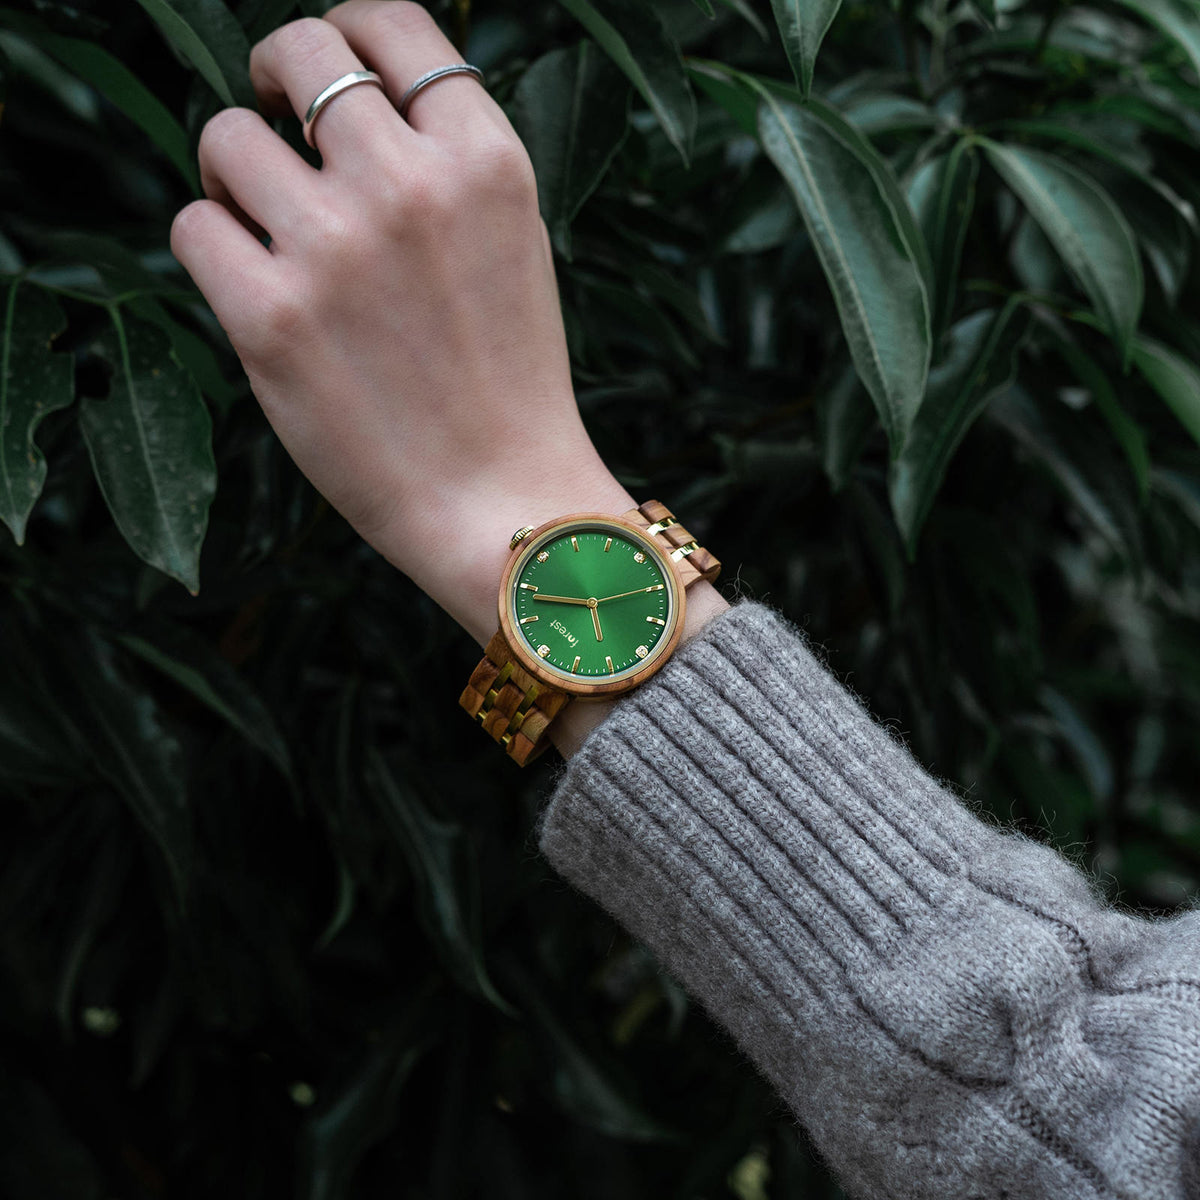 IVY Forest watch with the emerald face on a womans wrist as she touches the tree